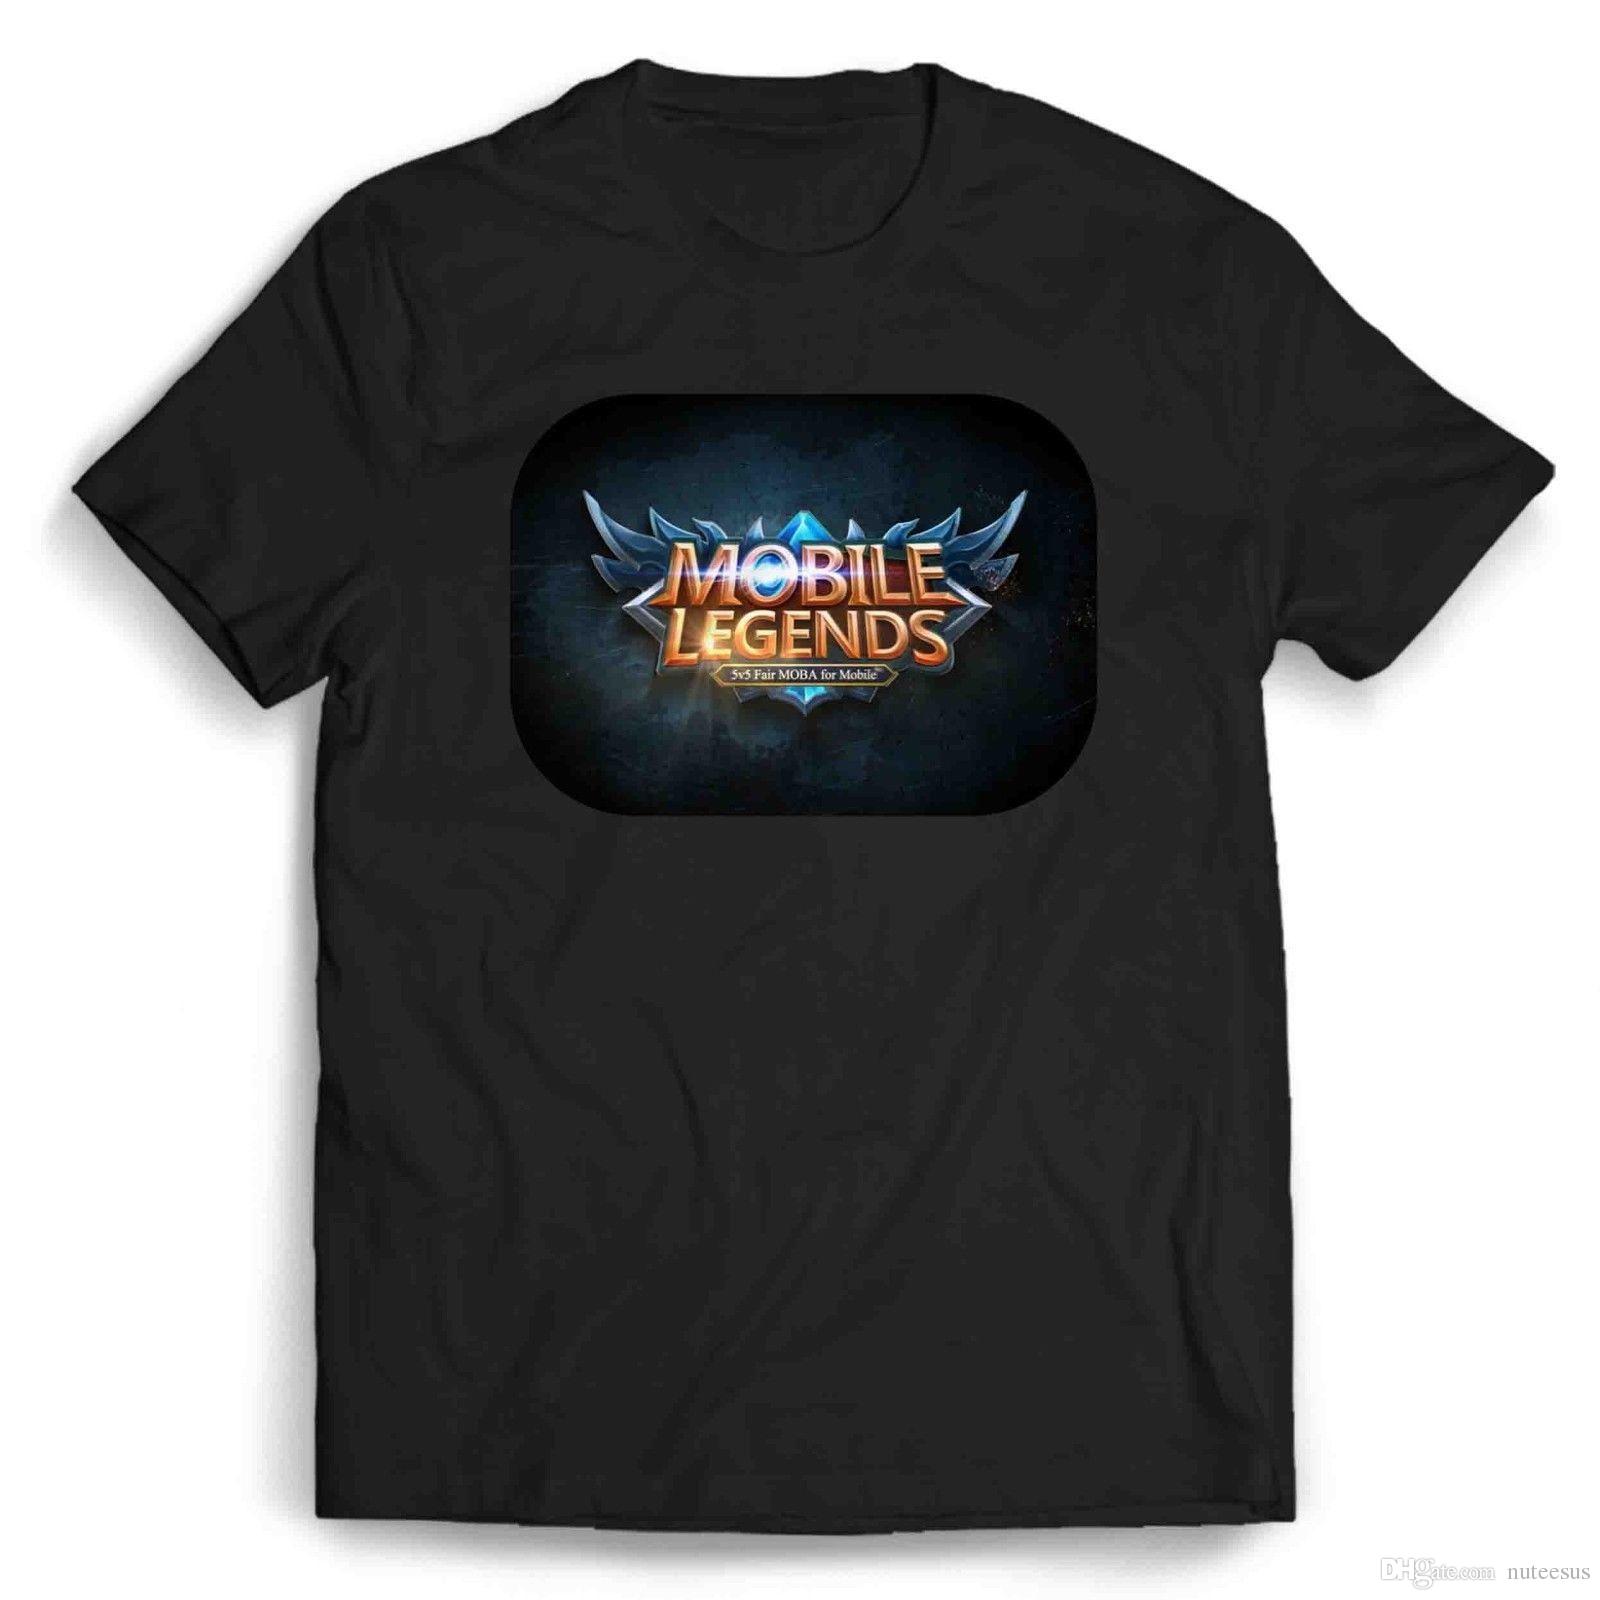 Mobile Legends Logo - Mobile Legends Logo T Shirt T Shirt S Tees Shirts From Nuteesus ...